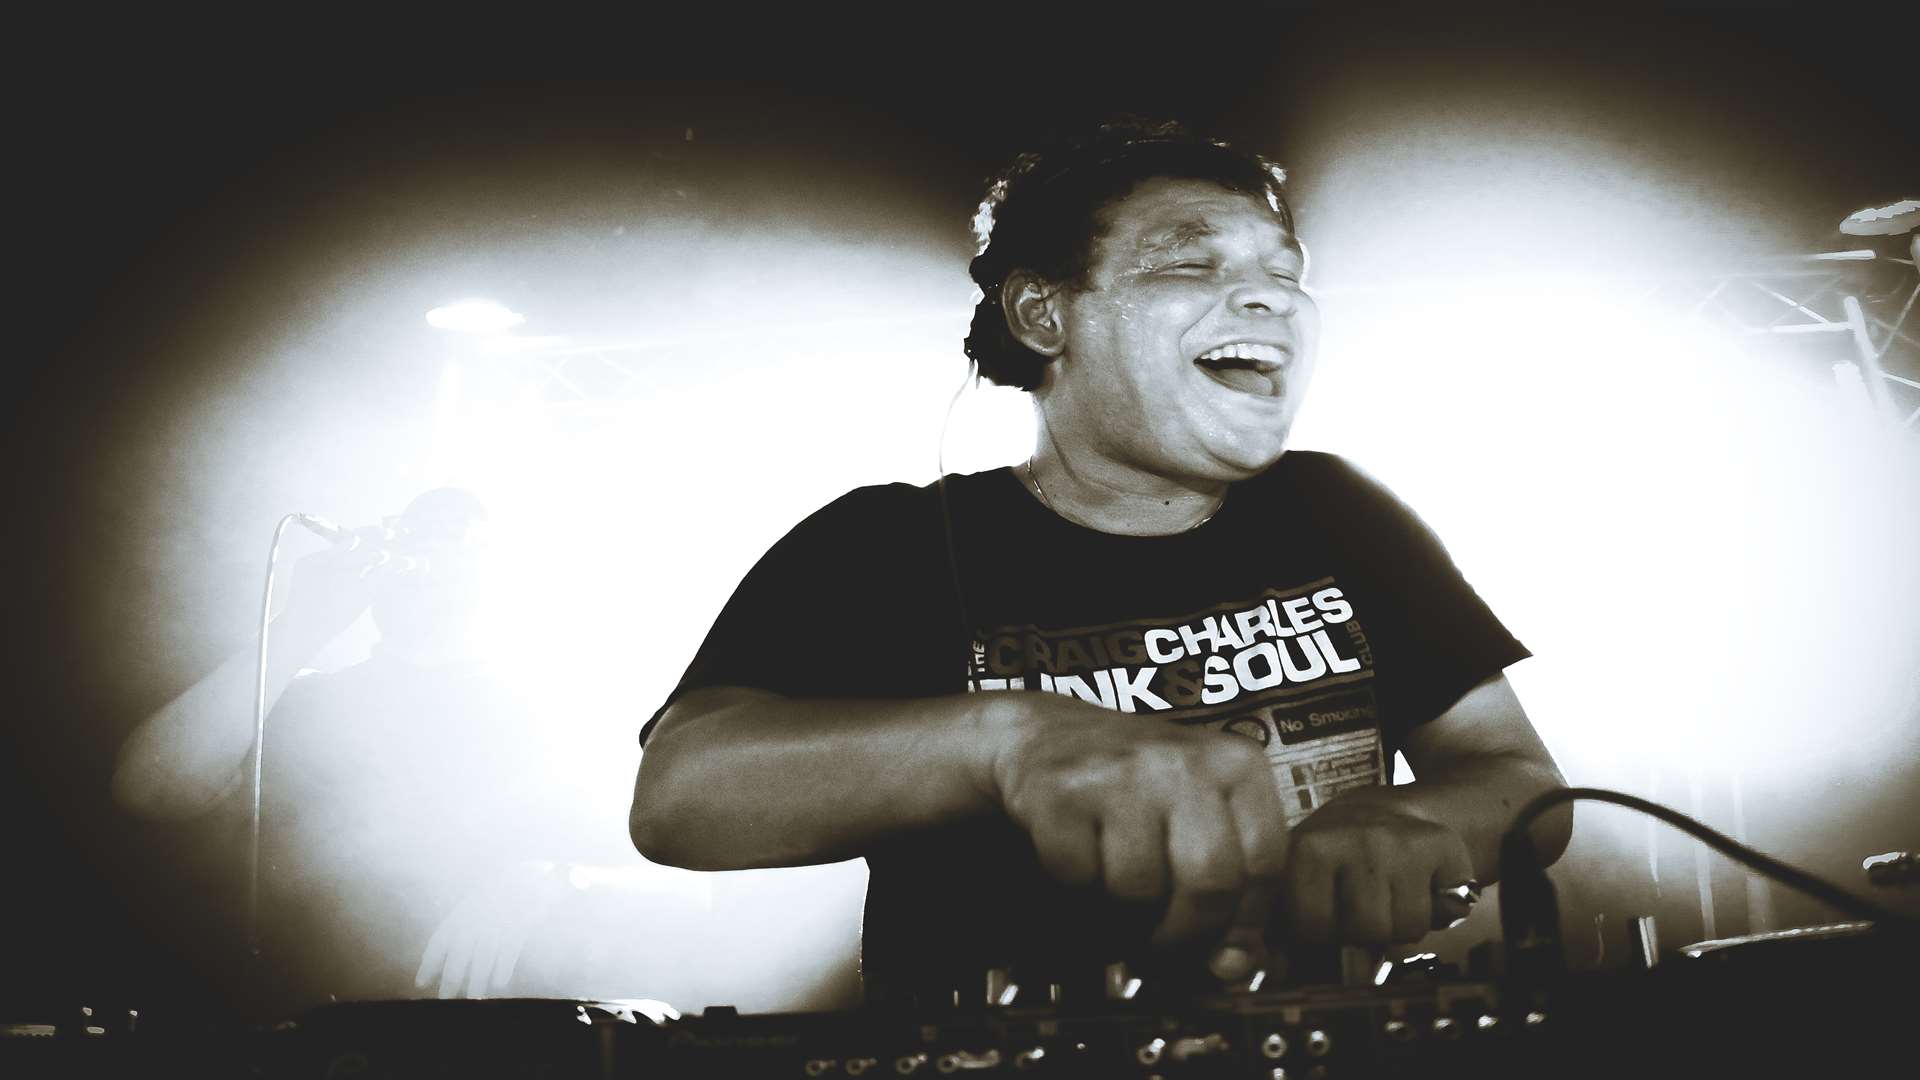 Organisers have announced Craig Charles as one of the headliners at new sea view entertainment hub